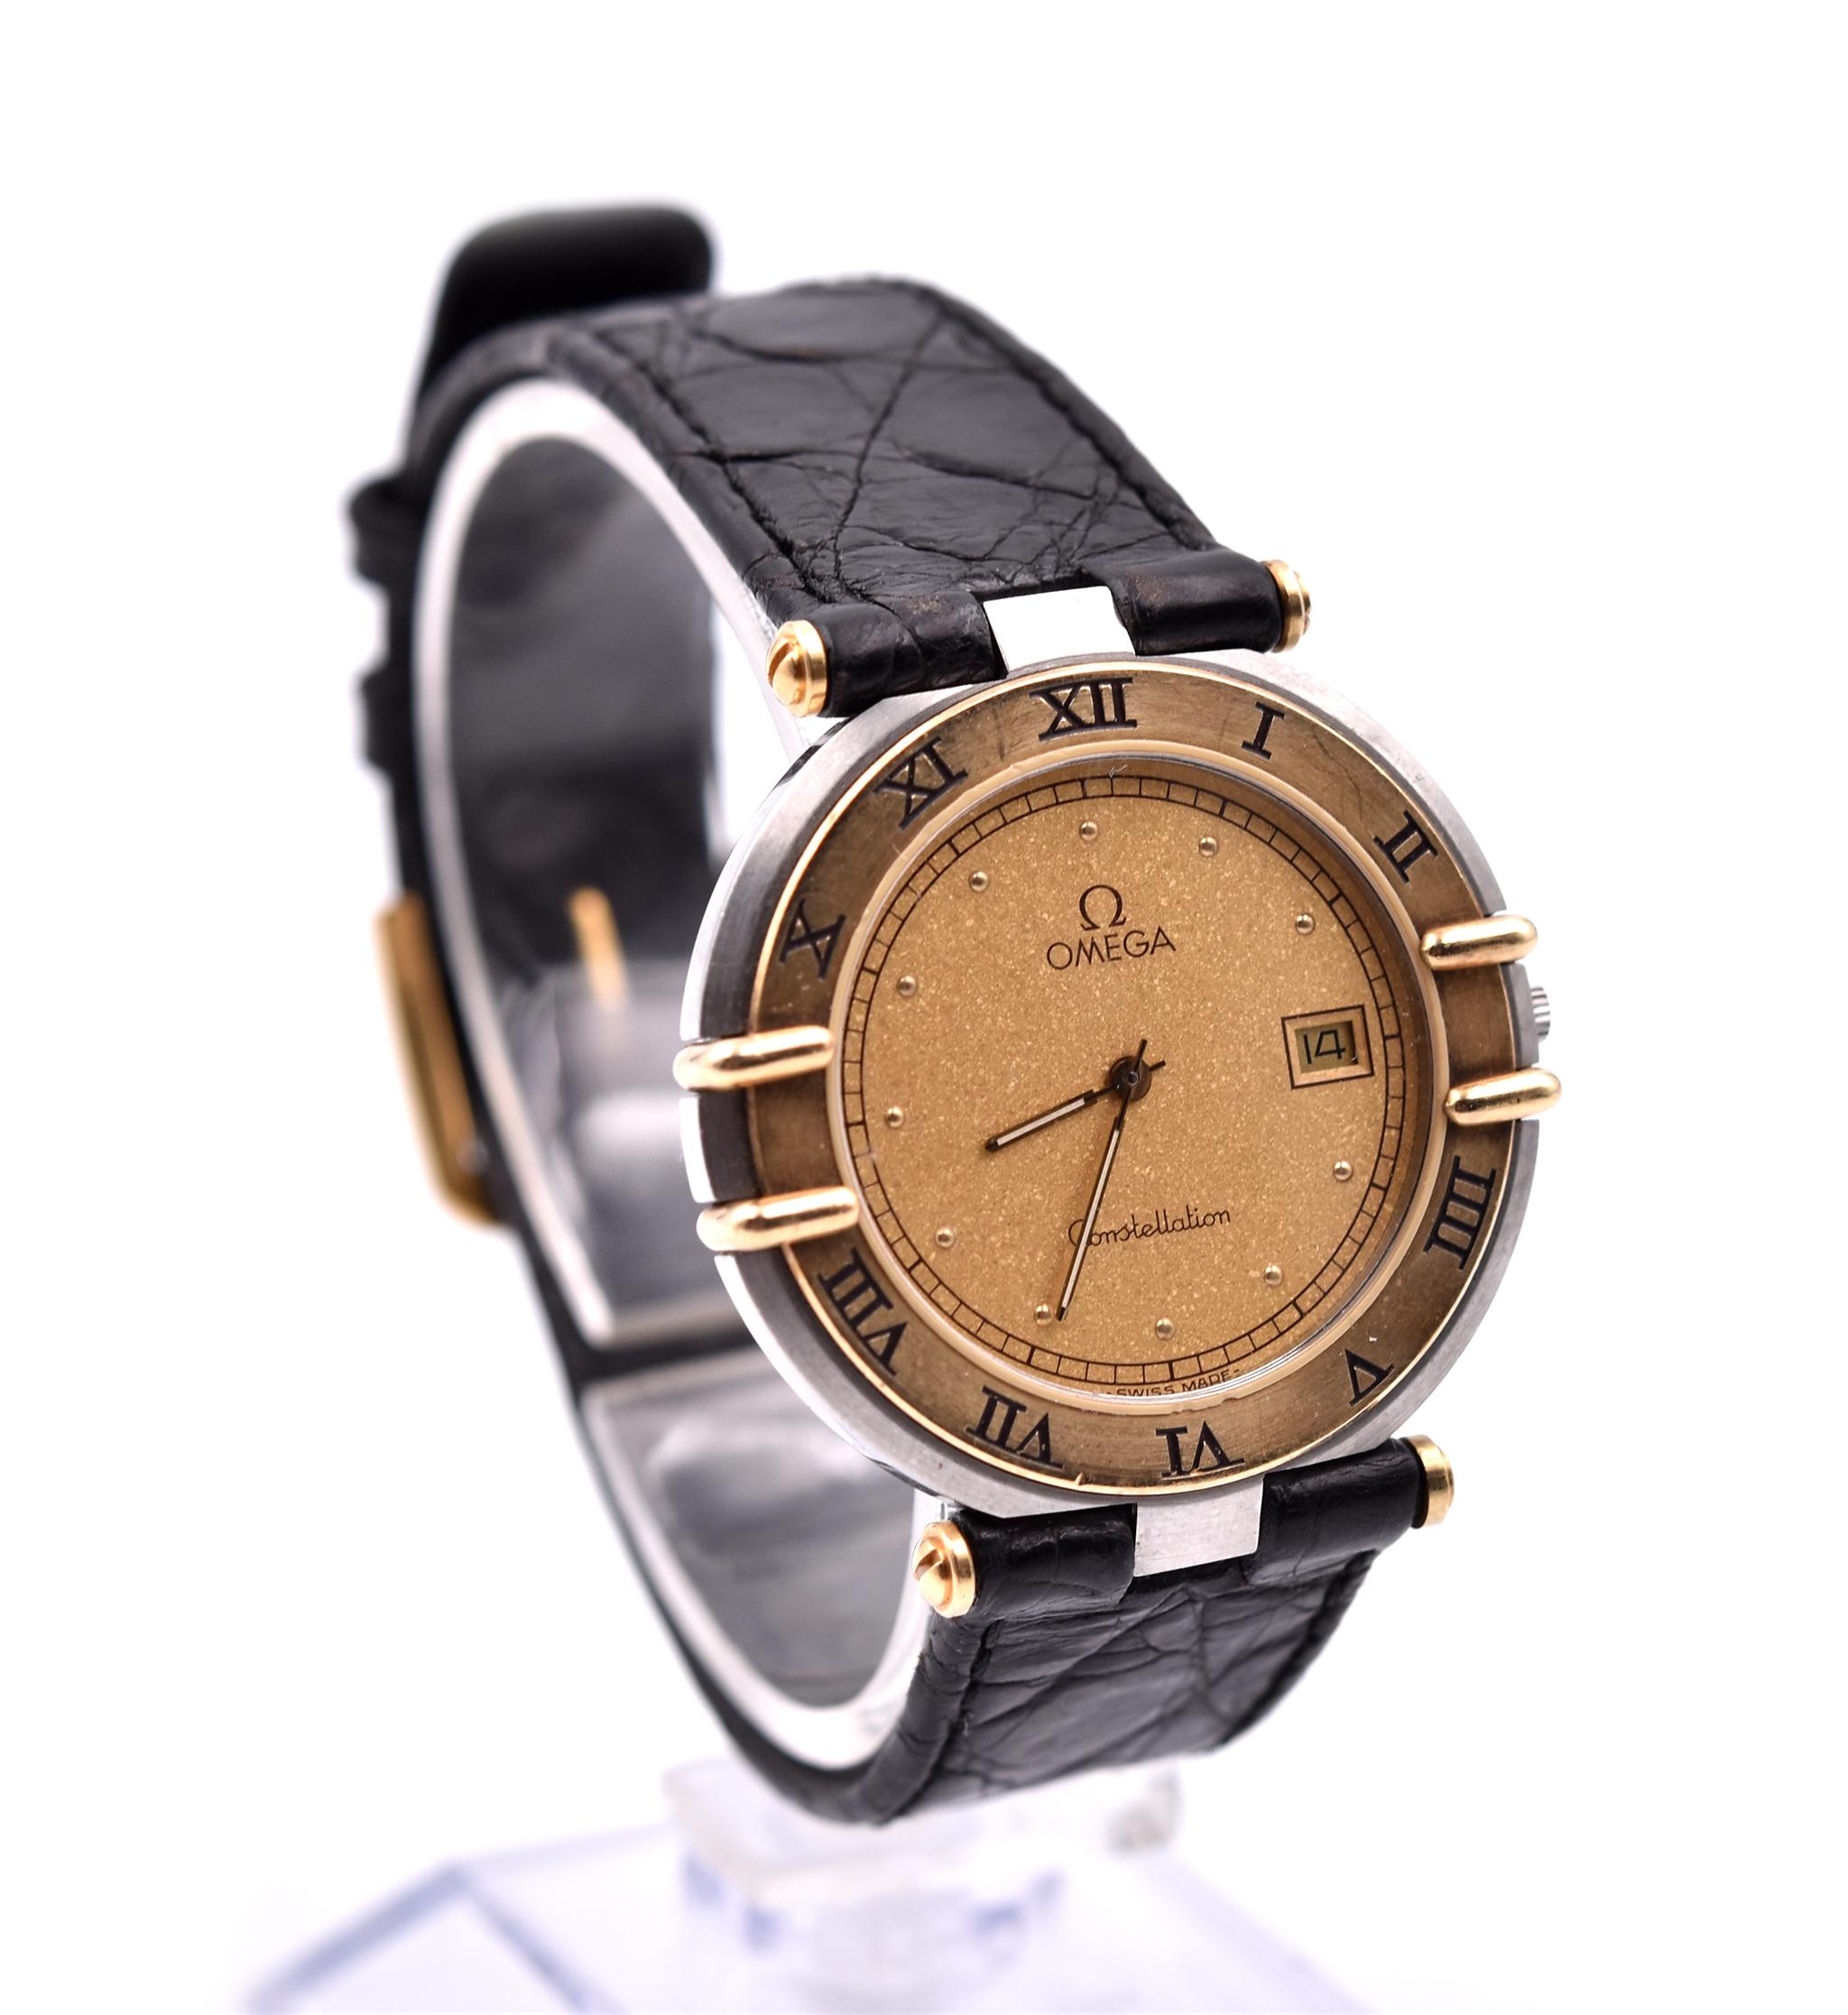 Movement: quartz
Function: hours, minutes, date
Case: 33mm stainless steel round case, sapphire crystal, pull/push crown, black Roman numerals on bezel
Band: black leather strap with gold buckle
Dial: gold dial with gold index markers, gold